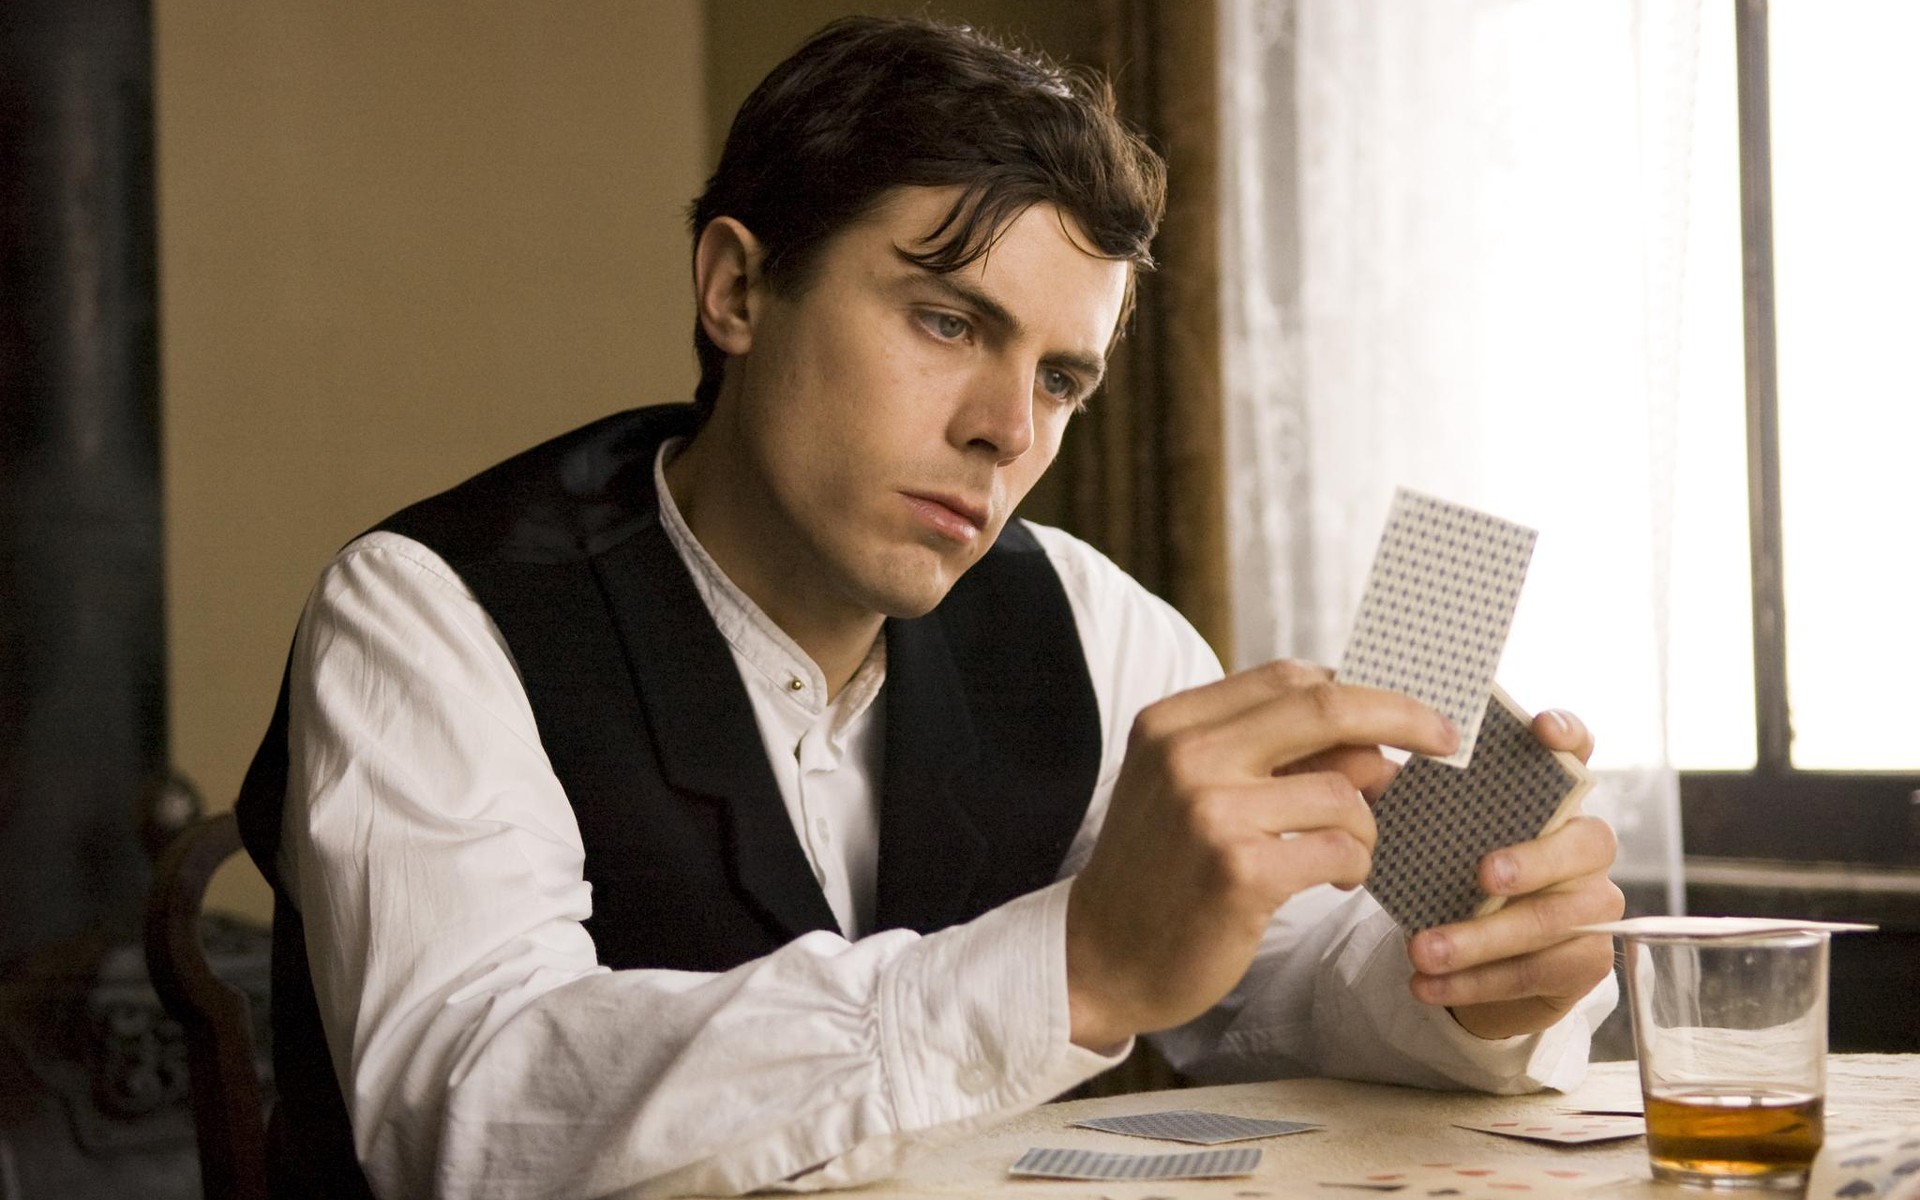 movie, the assassination of jesse james by the coward robert ford, casey affleck, robert ford